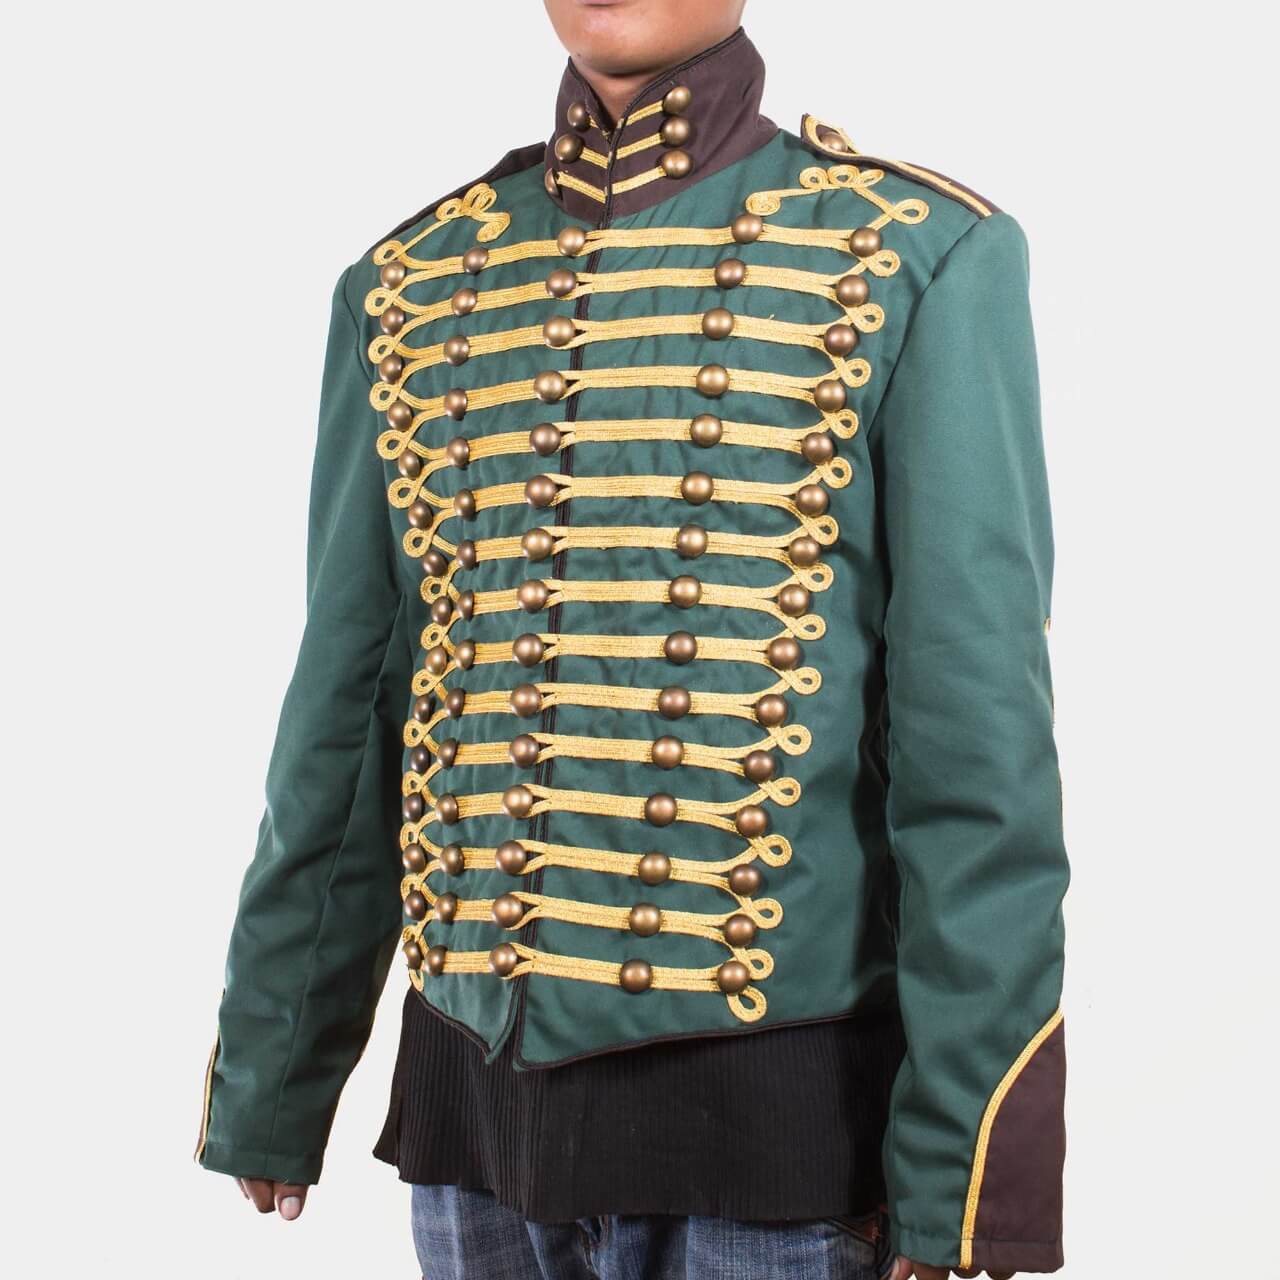 Green Steampunk Military Jacket with gold Braiding Back and front1